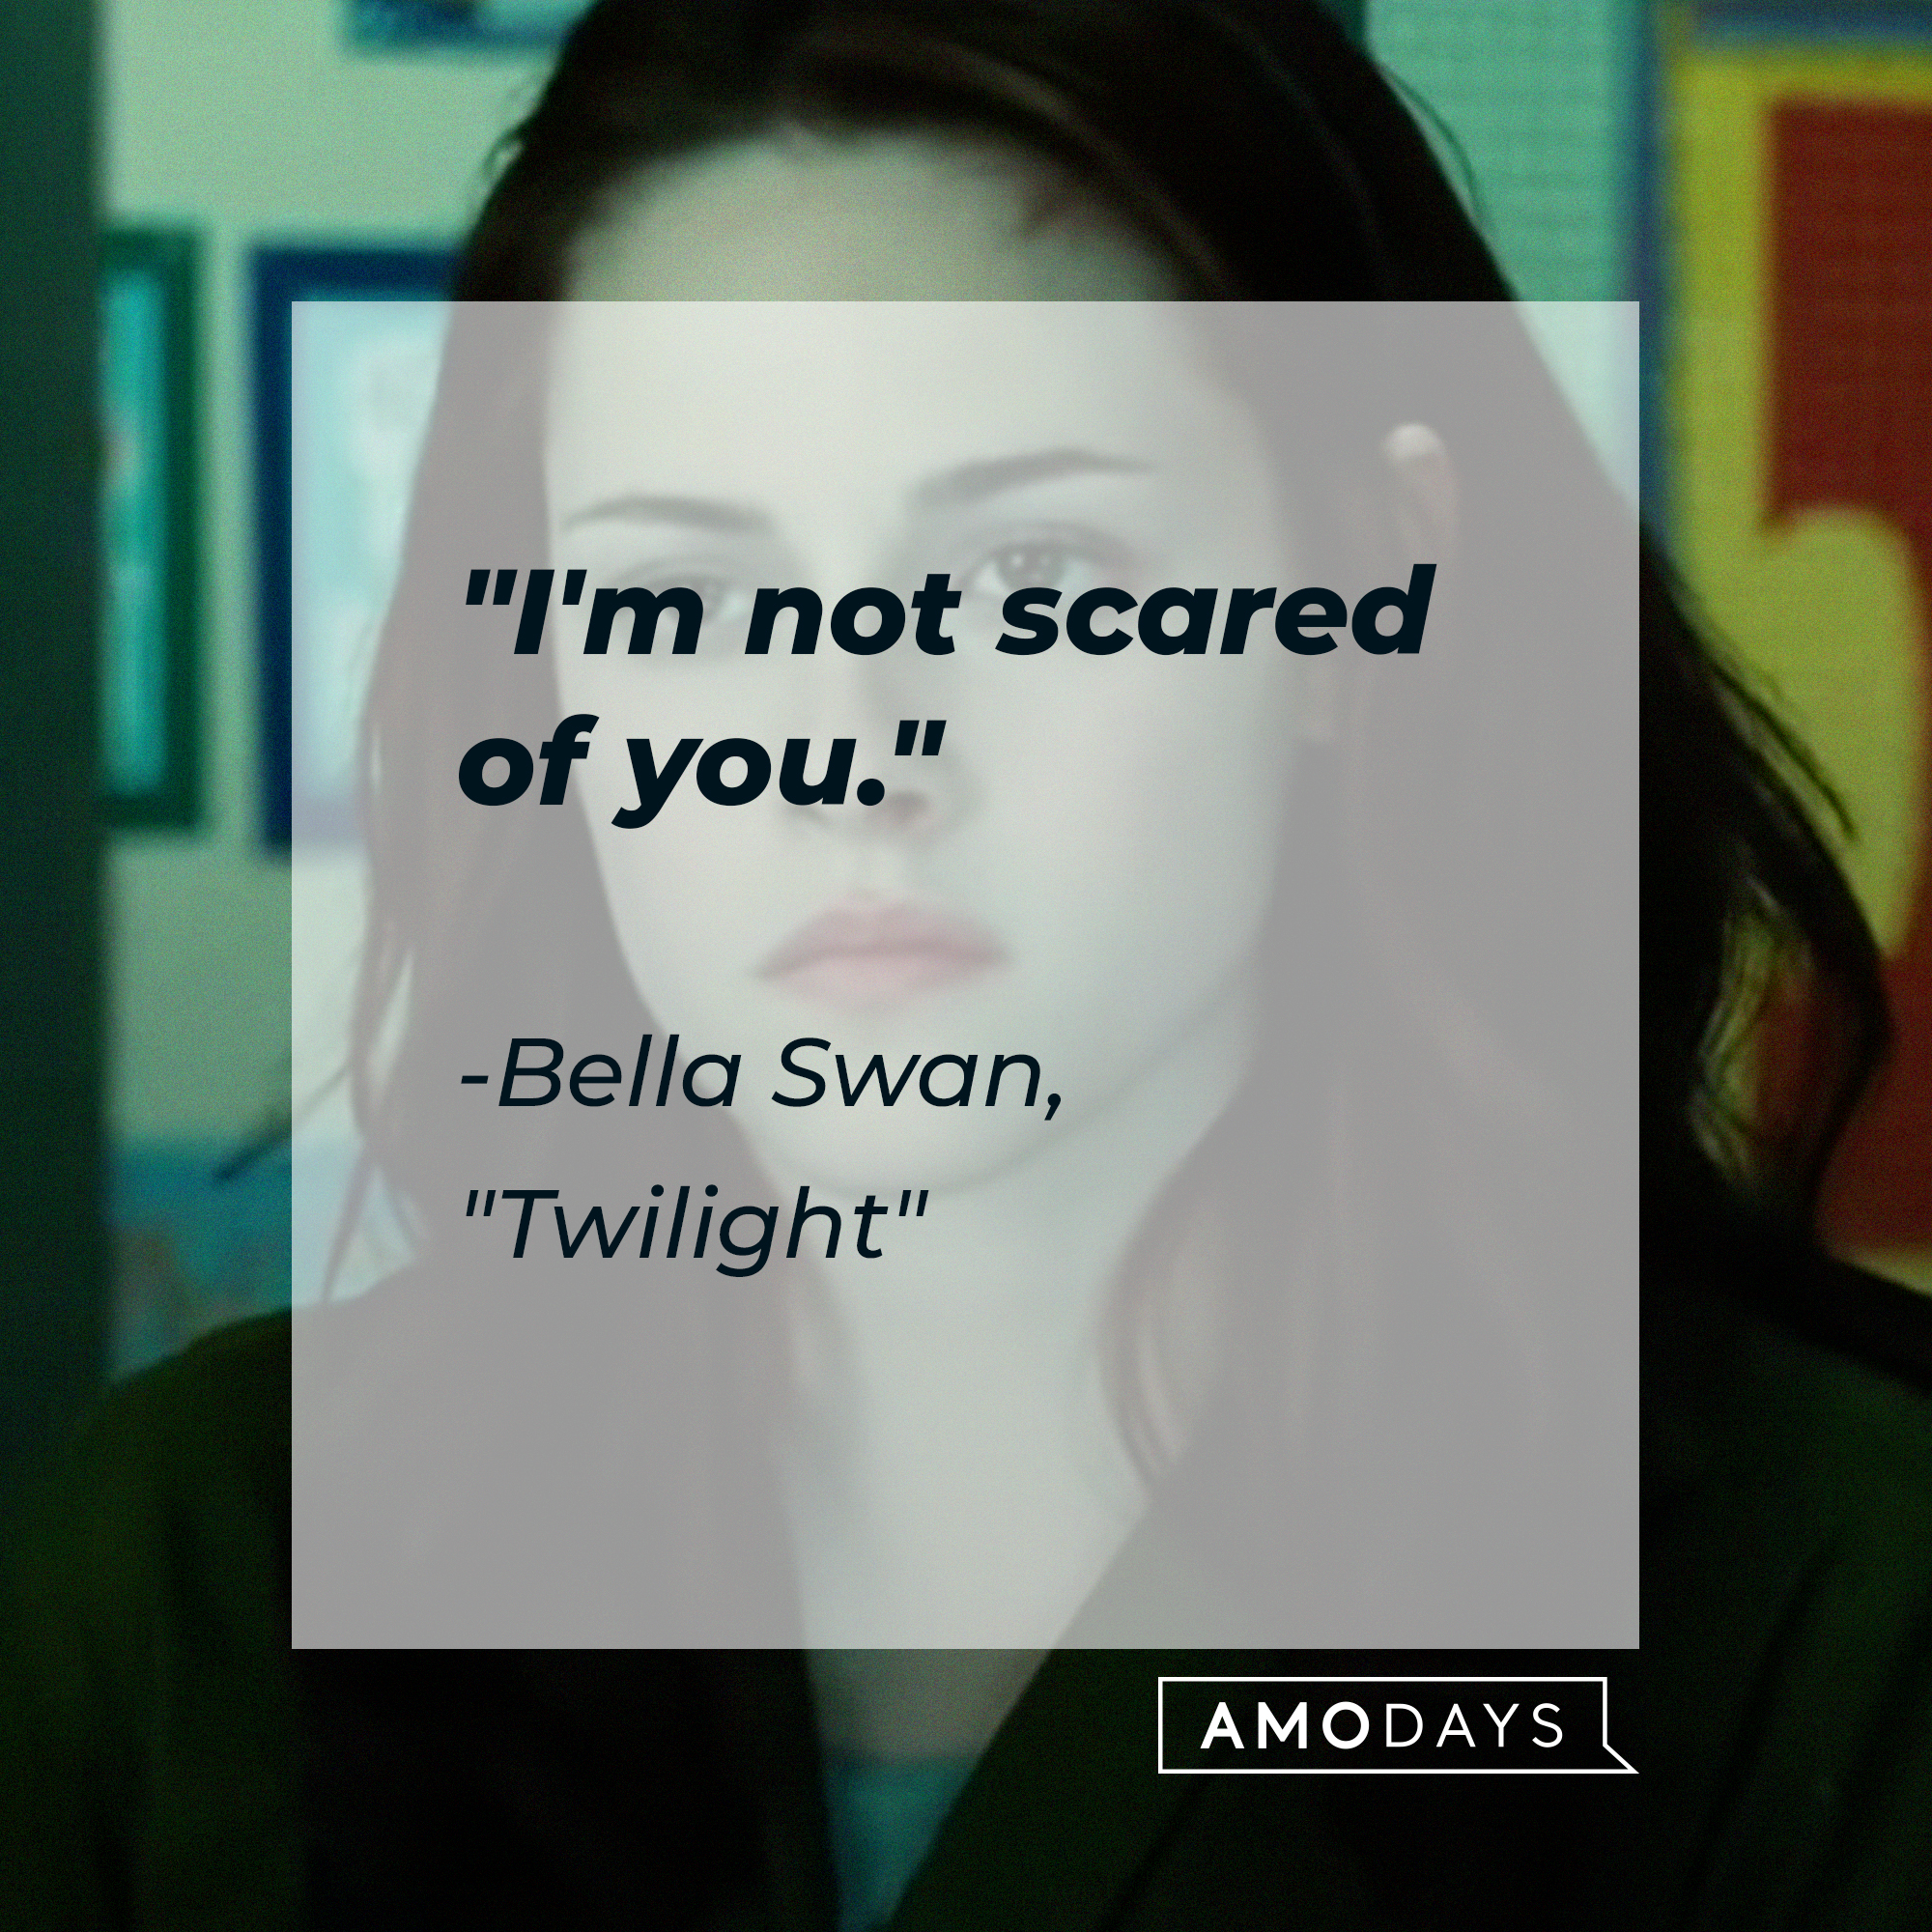 Bella Swan with her quote: "I'm not scared of you." | Source: Facebook.com/twilight